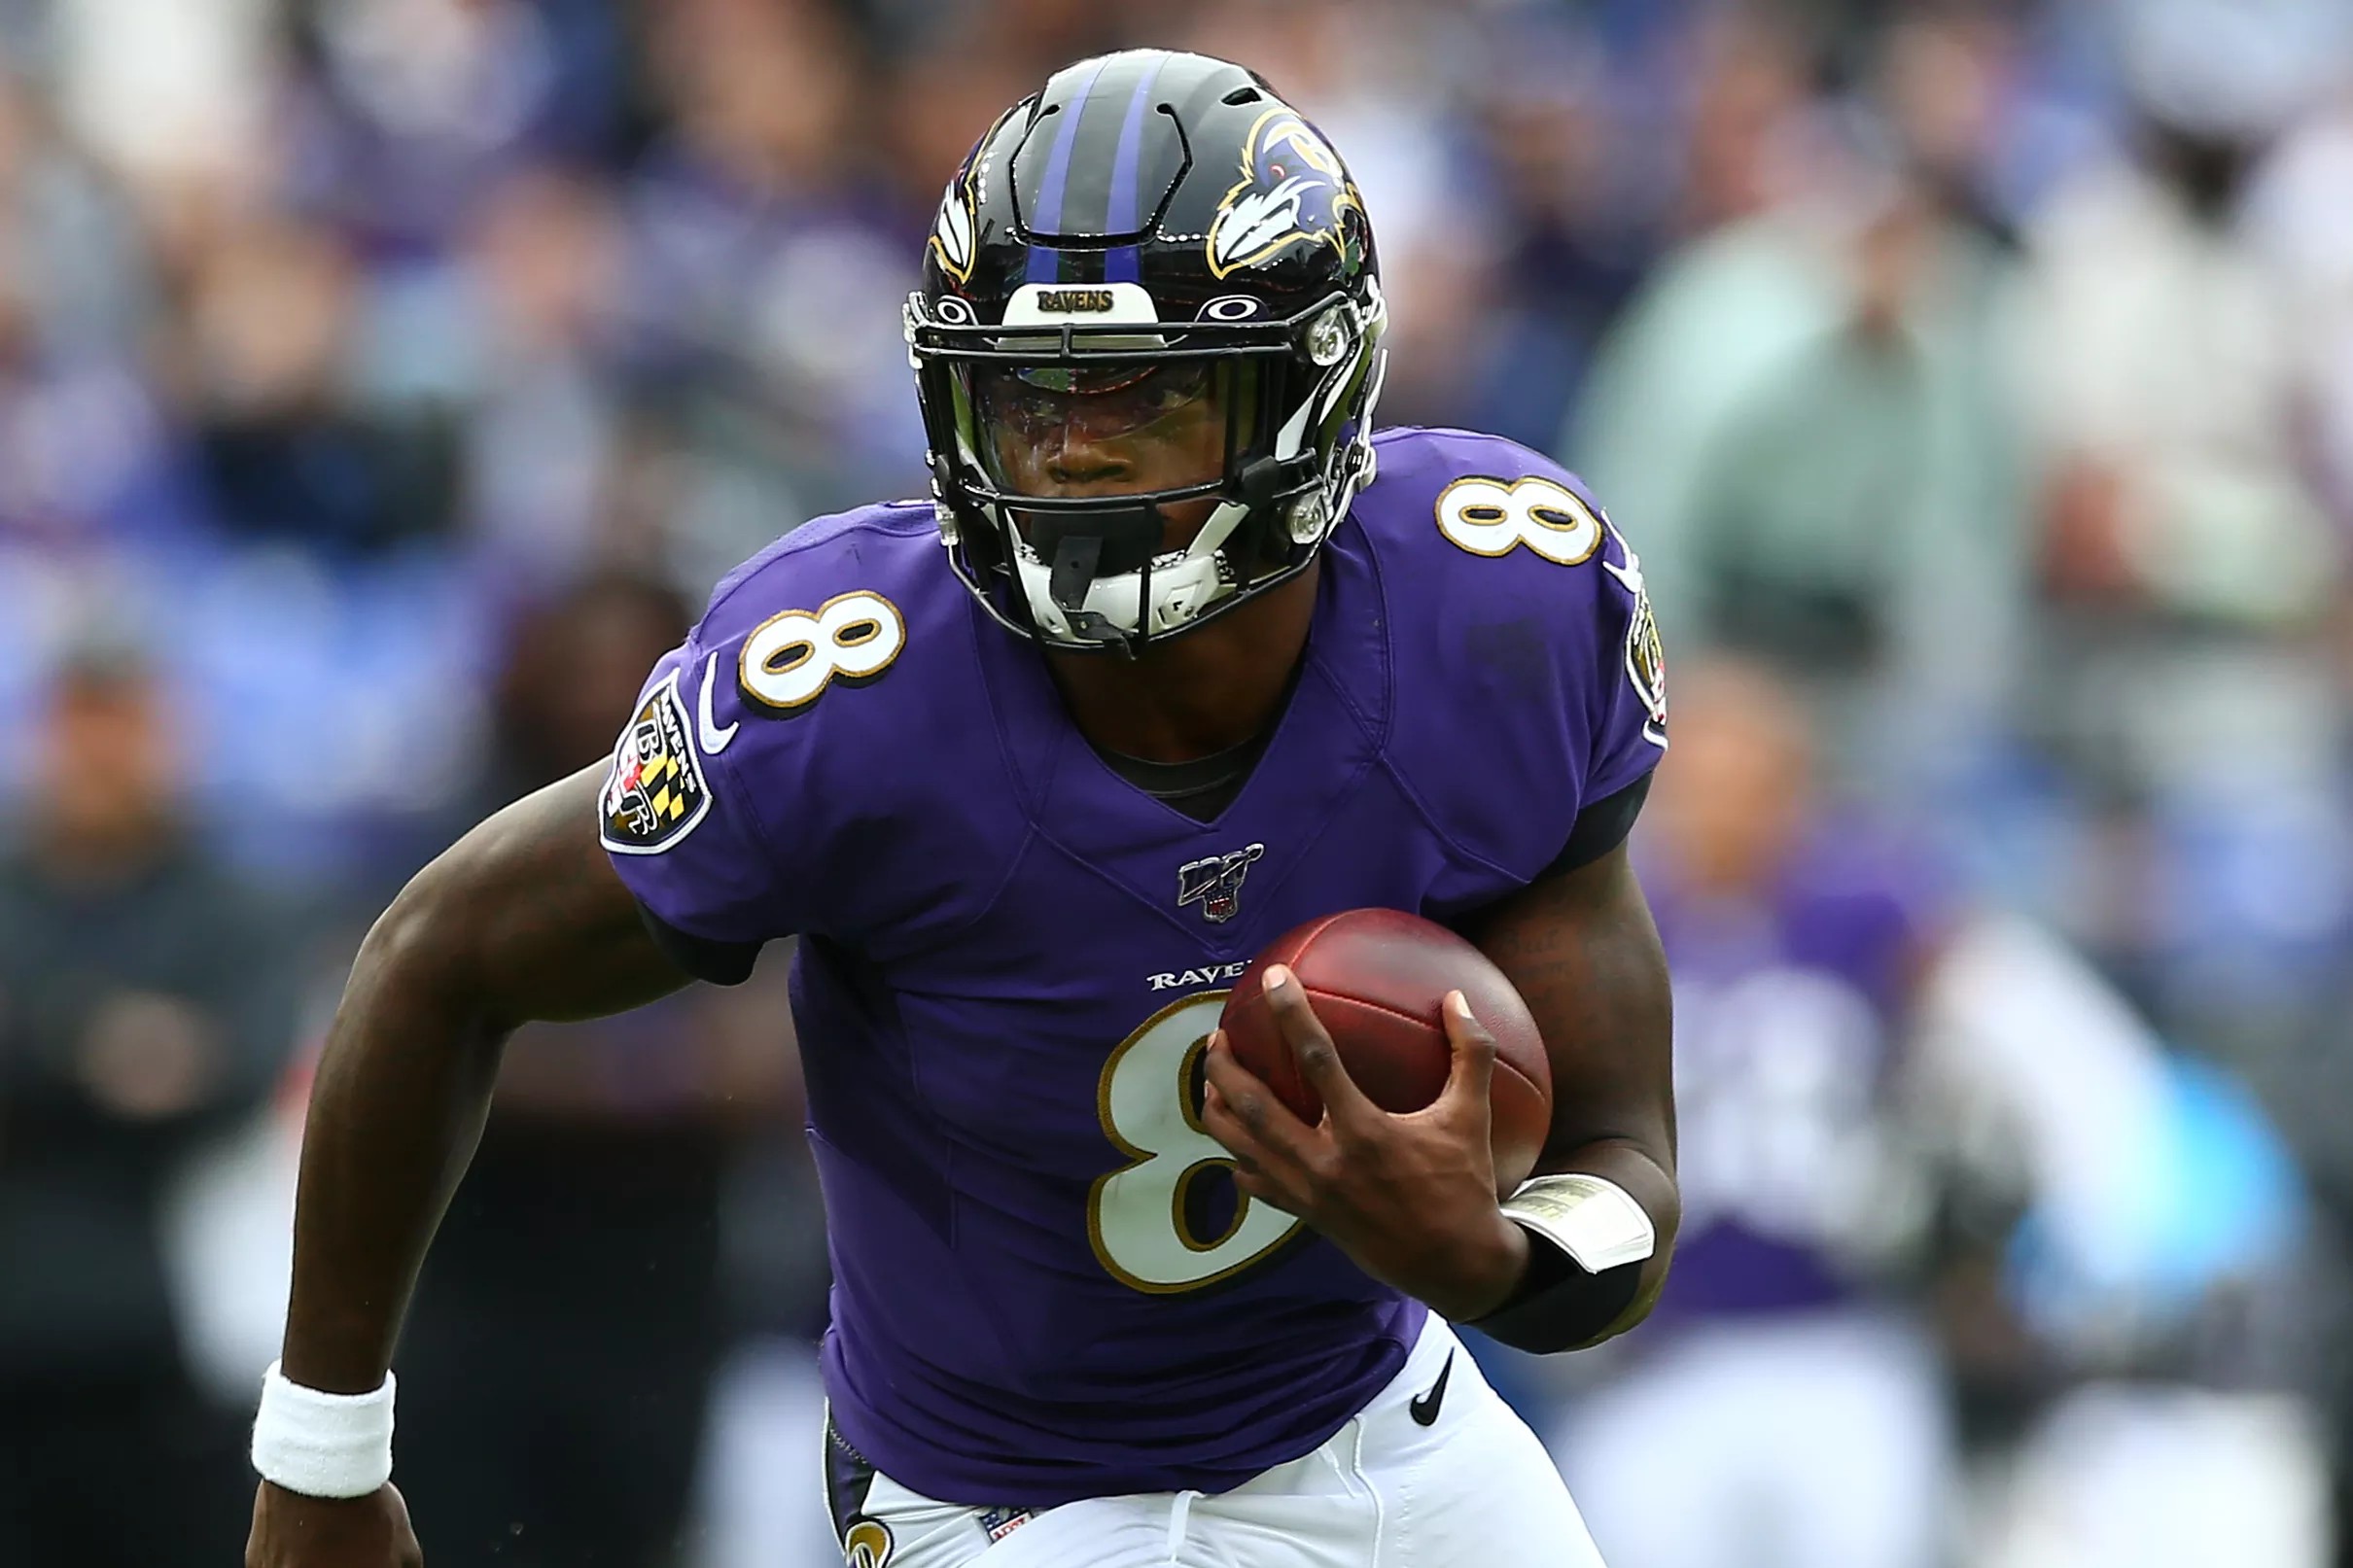 Lamar Jackson breaks the NFL record for most rushing yards by a quarterback